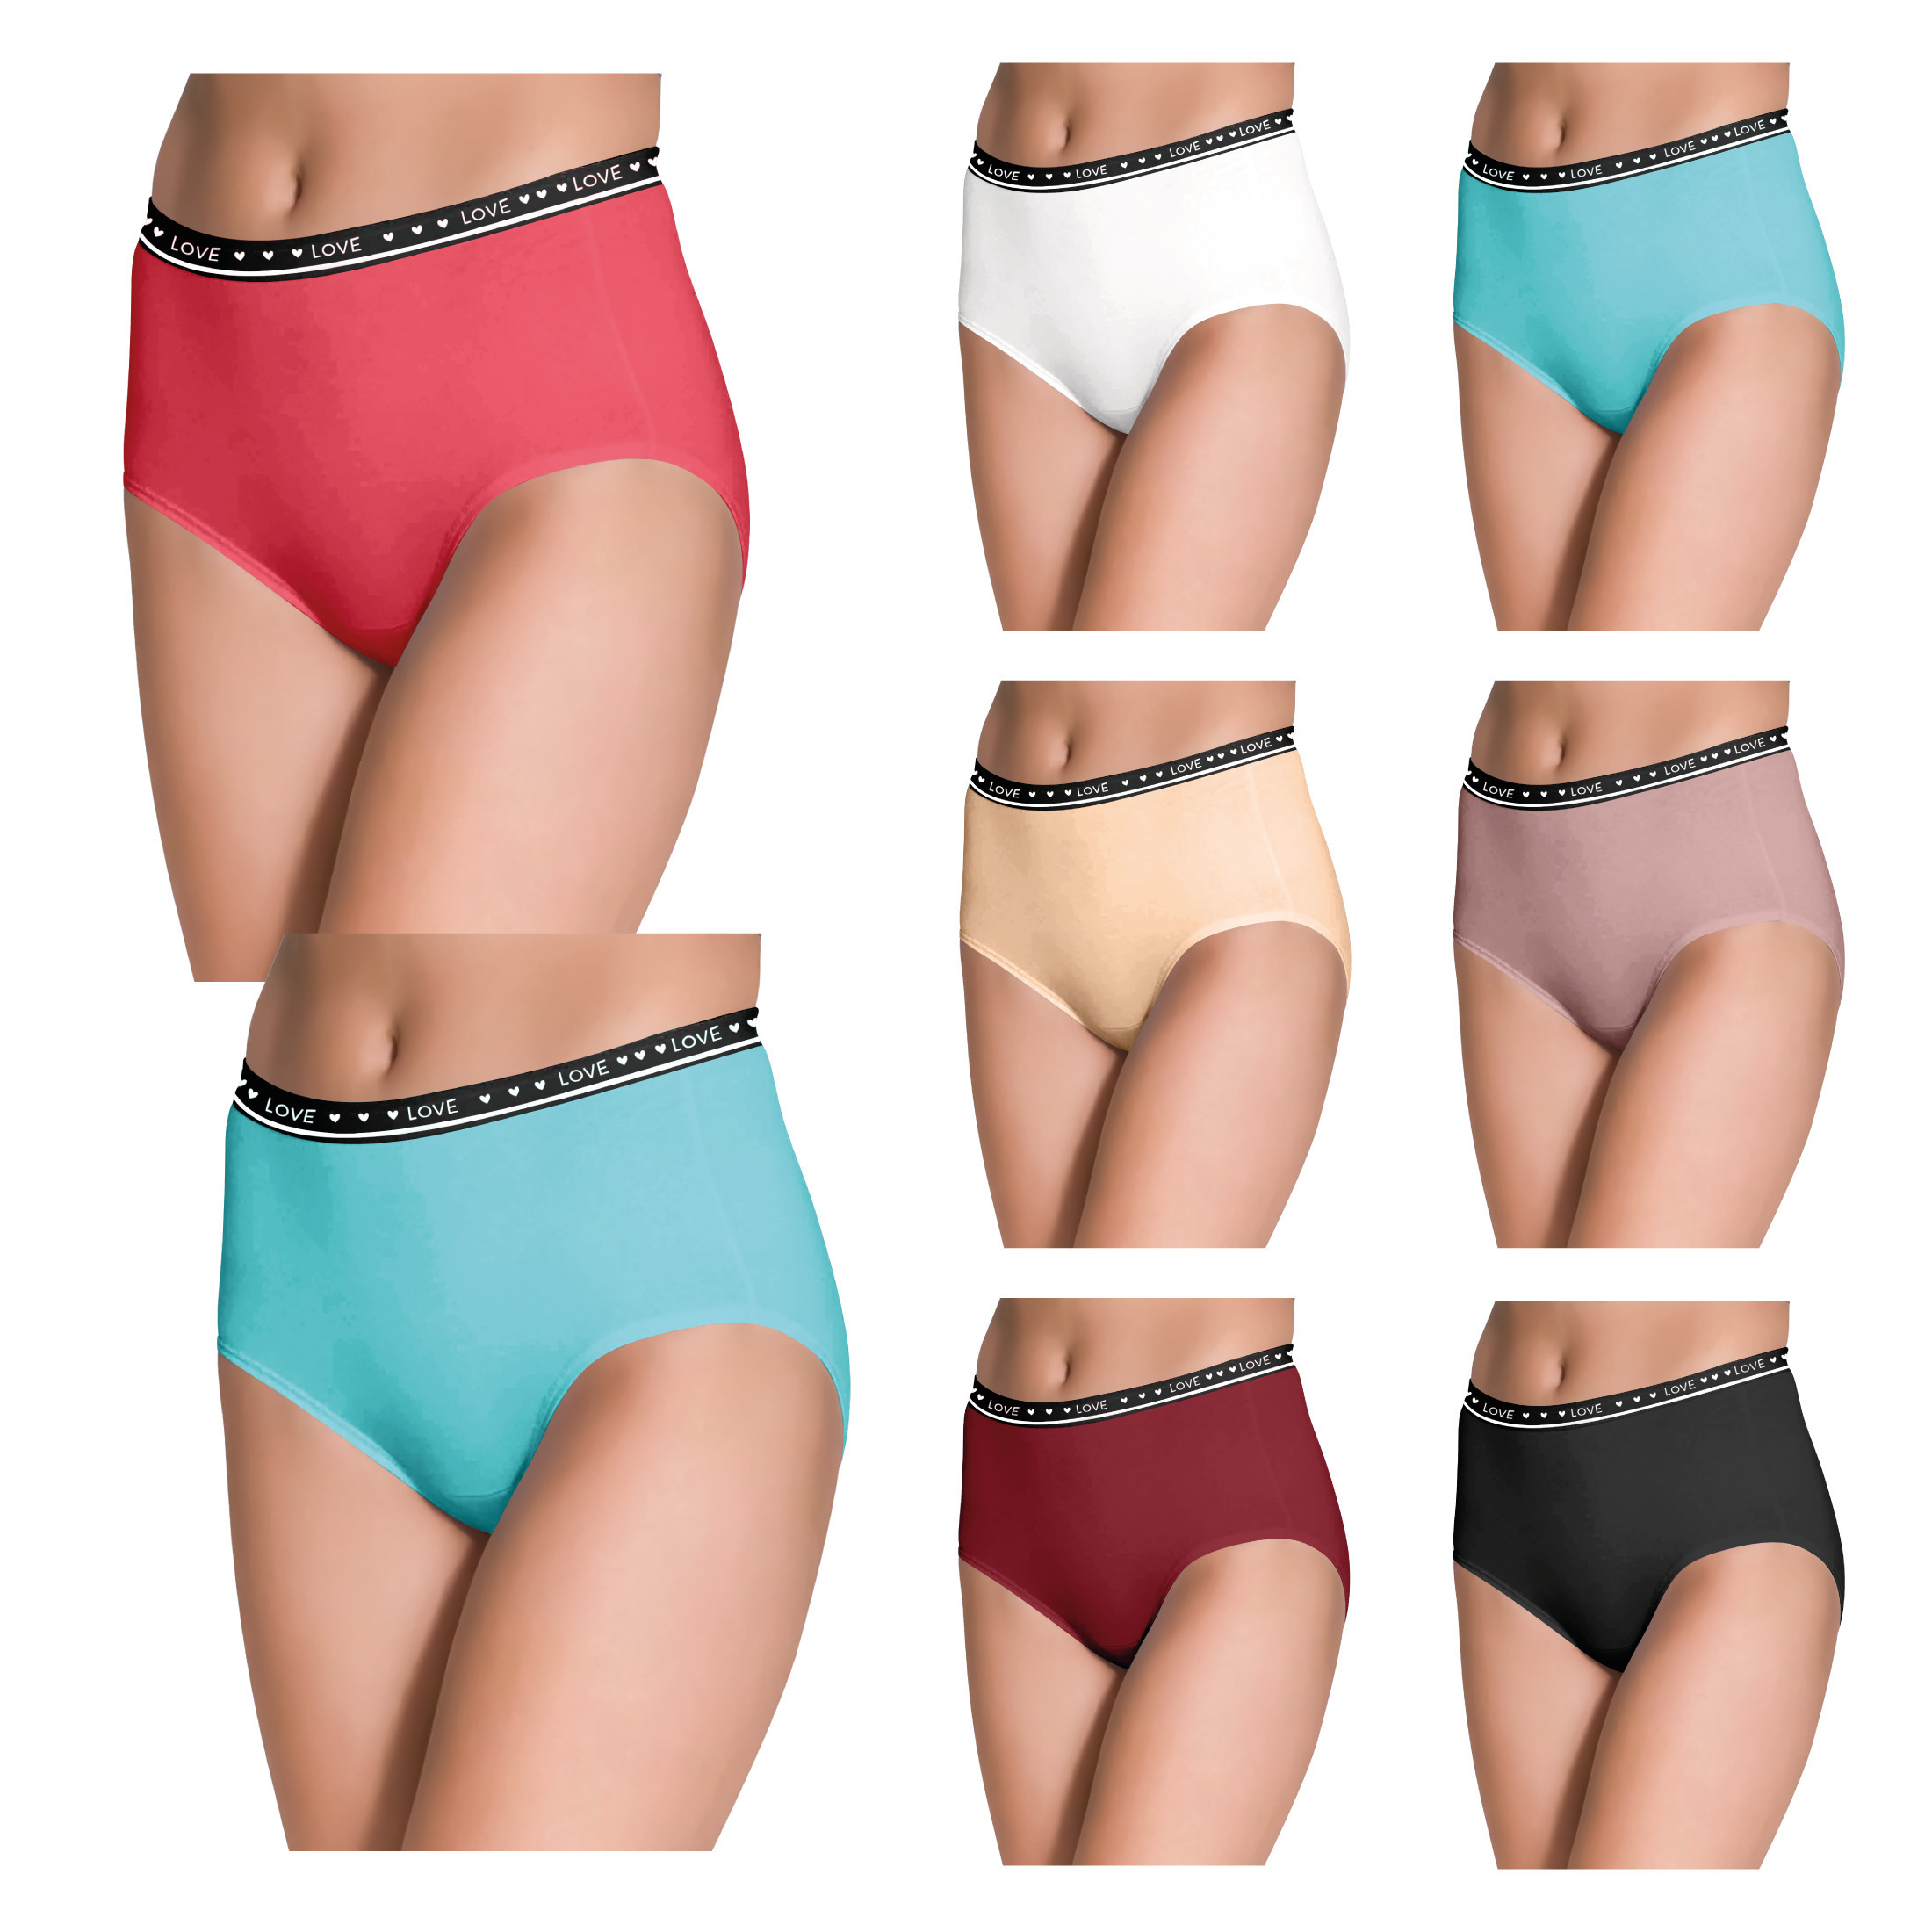 6-Pack: Women's Ultra Soft Moisture Wicking Panties Cotton Perfect Fit Underwear (Plus Sizes Available ) - XX-Large